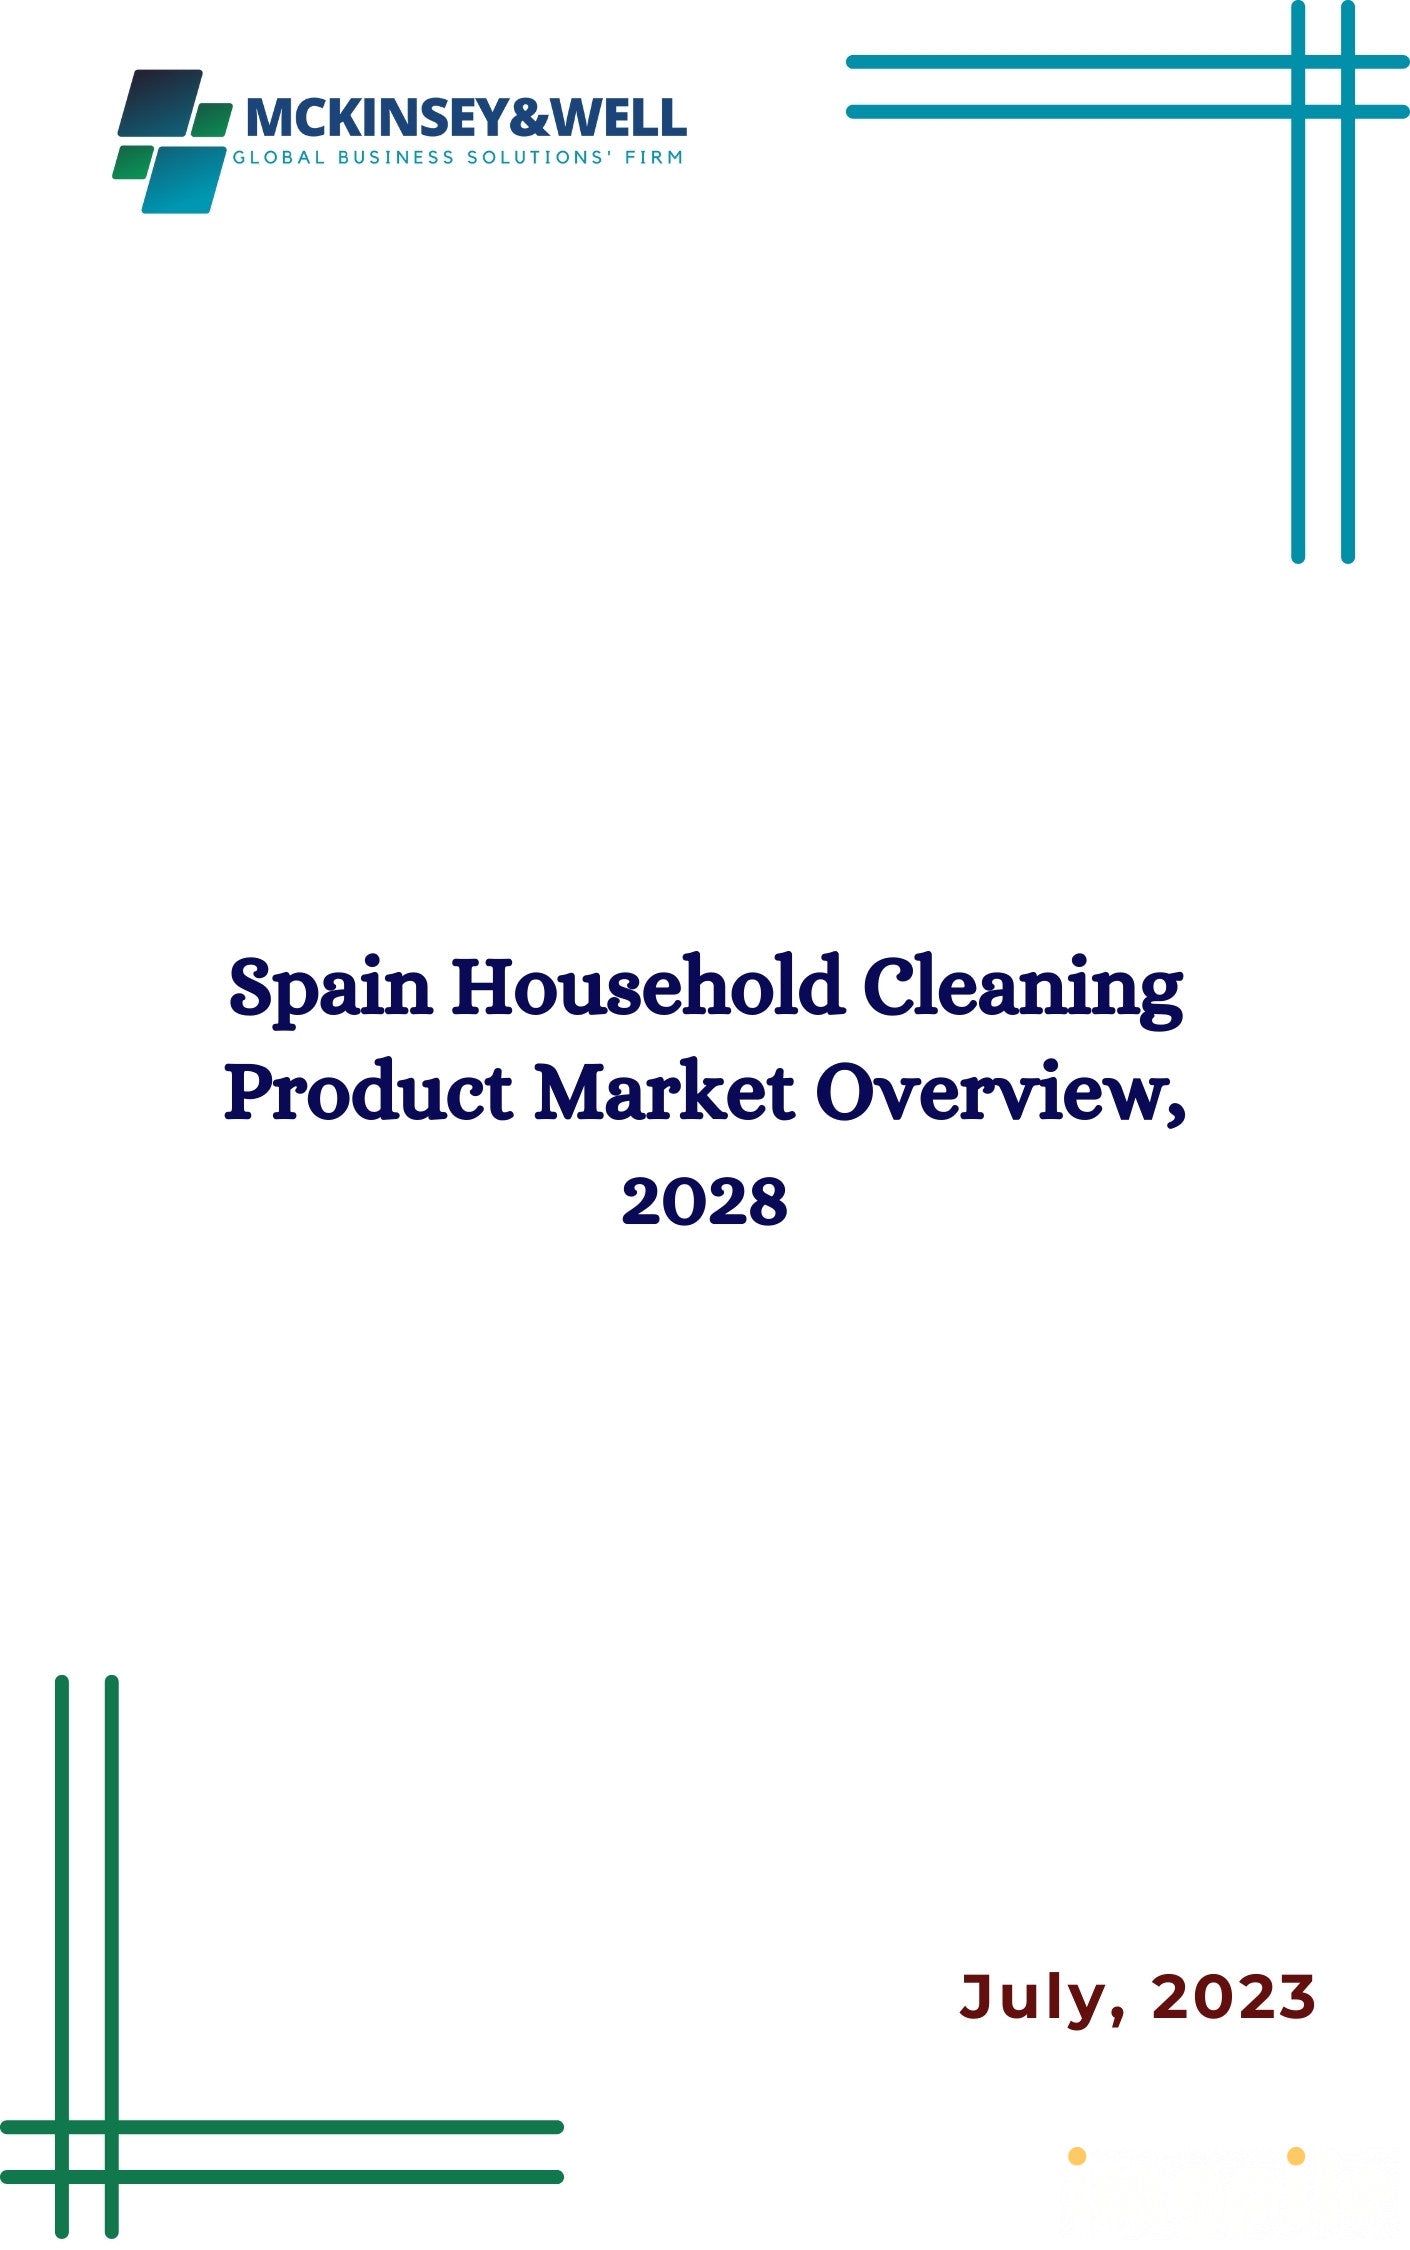 Spain Household Cleaning Product Market Overview, 2028